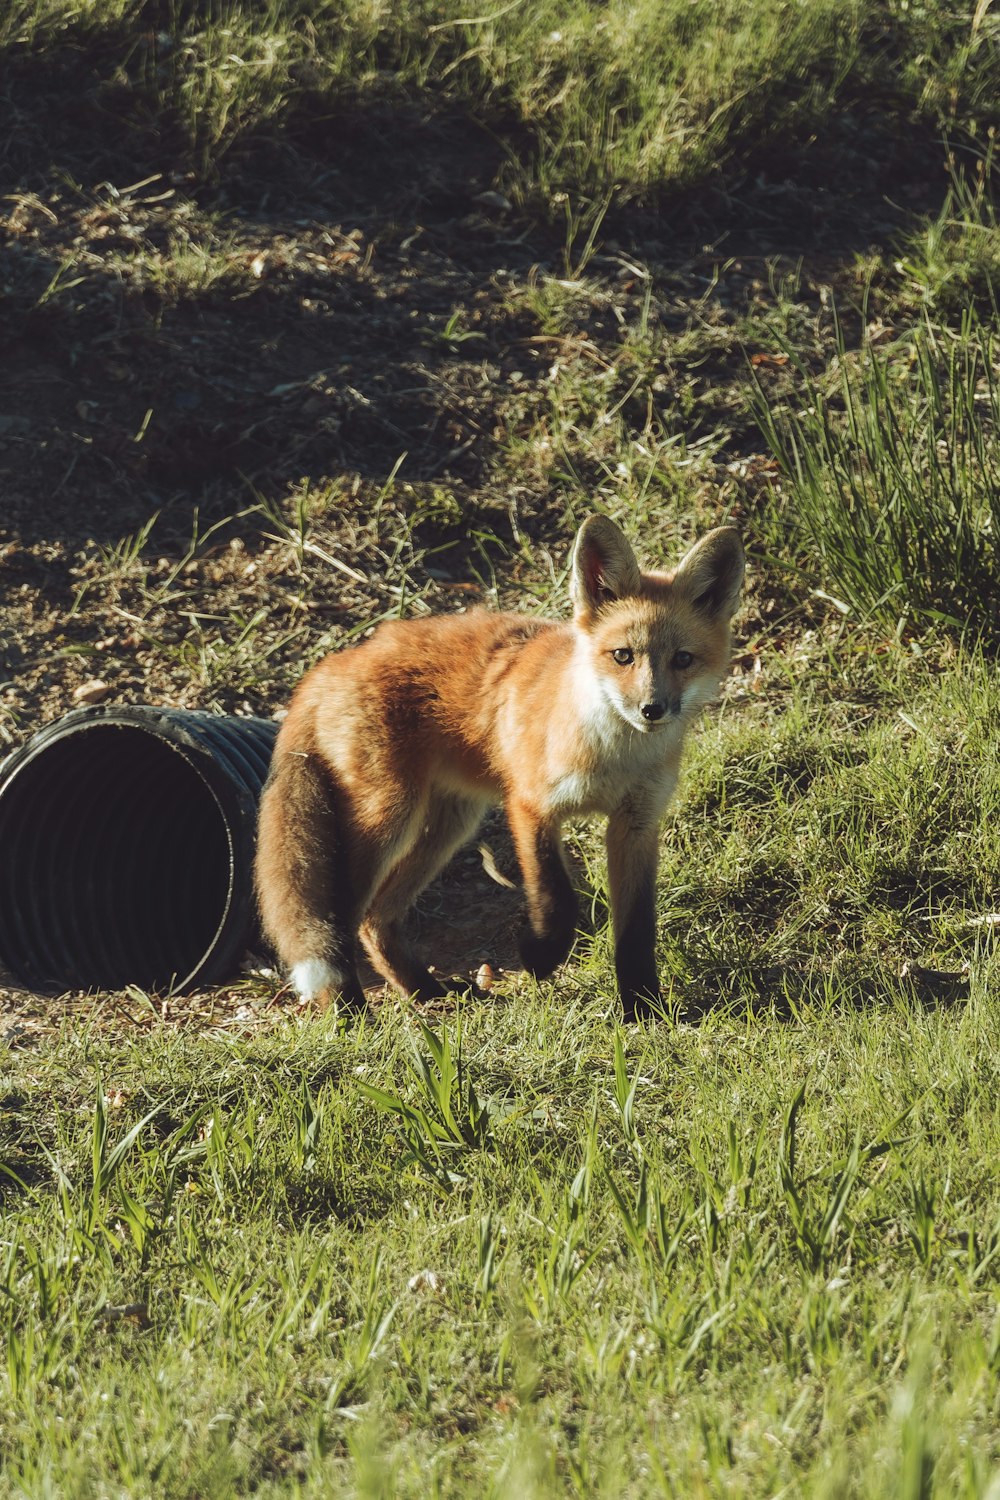 a fox standing next to a barrel in the grass